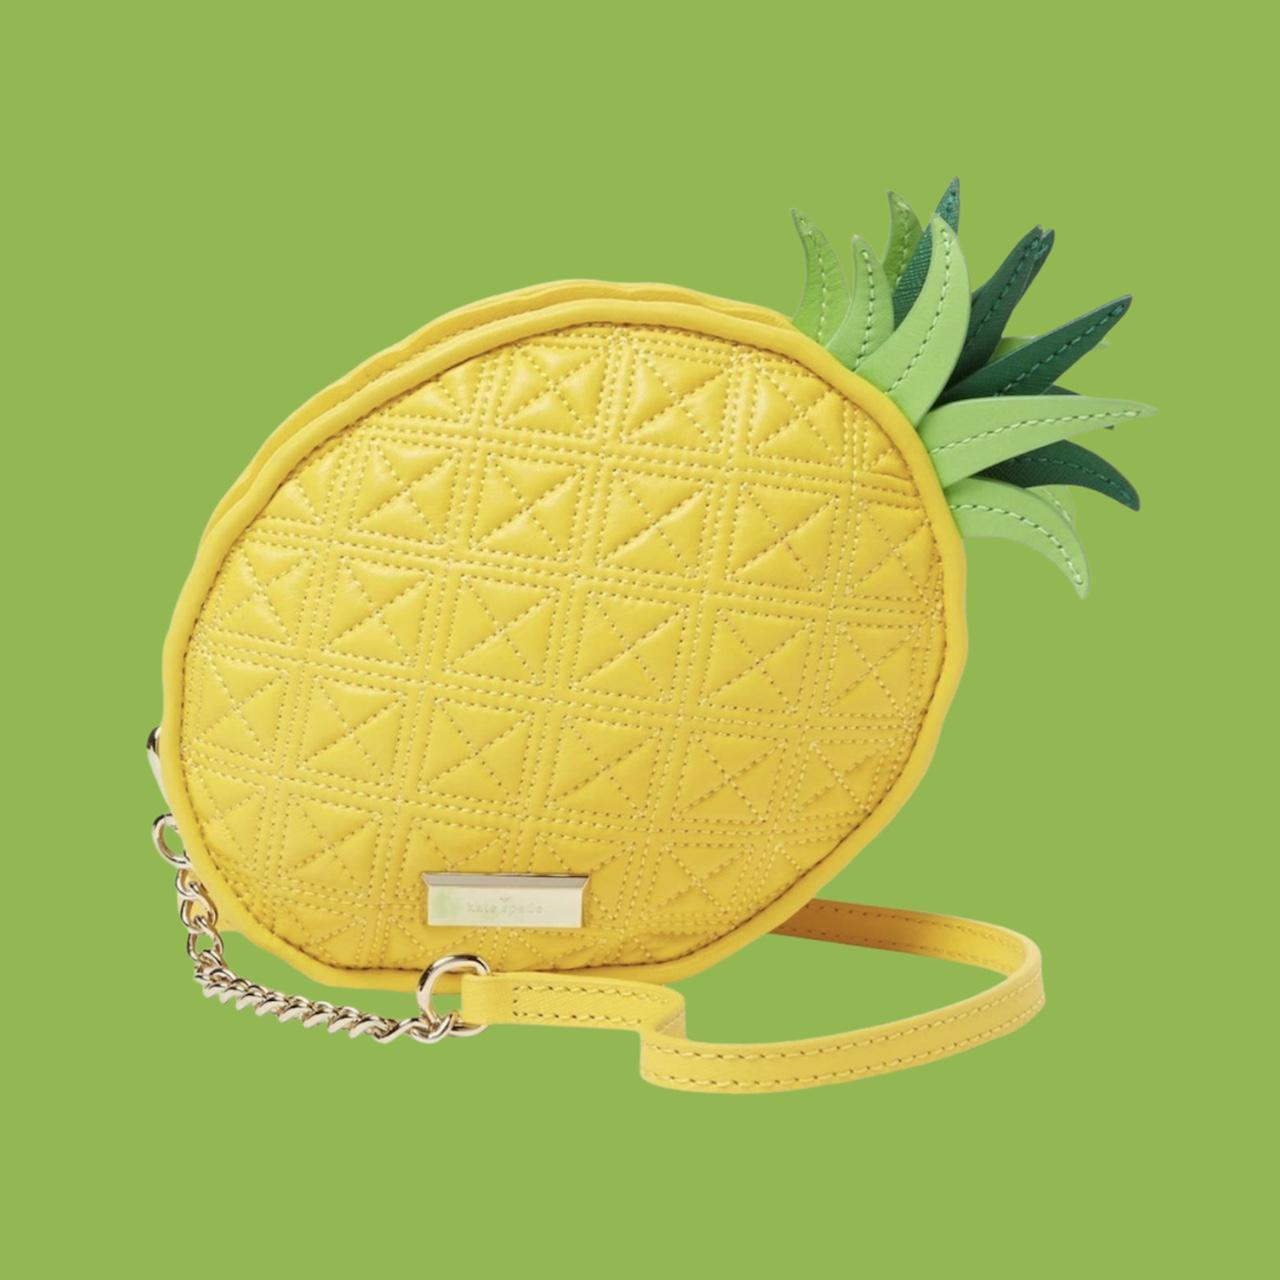 New With Tags Kate Spade New York Pineapple Crossbody Shoulder Purse | eBay